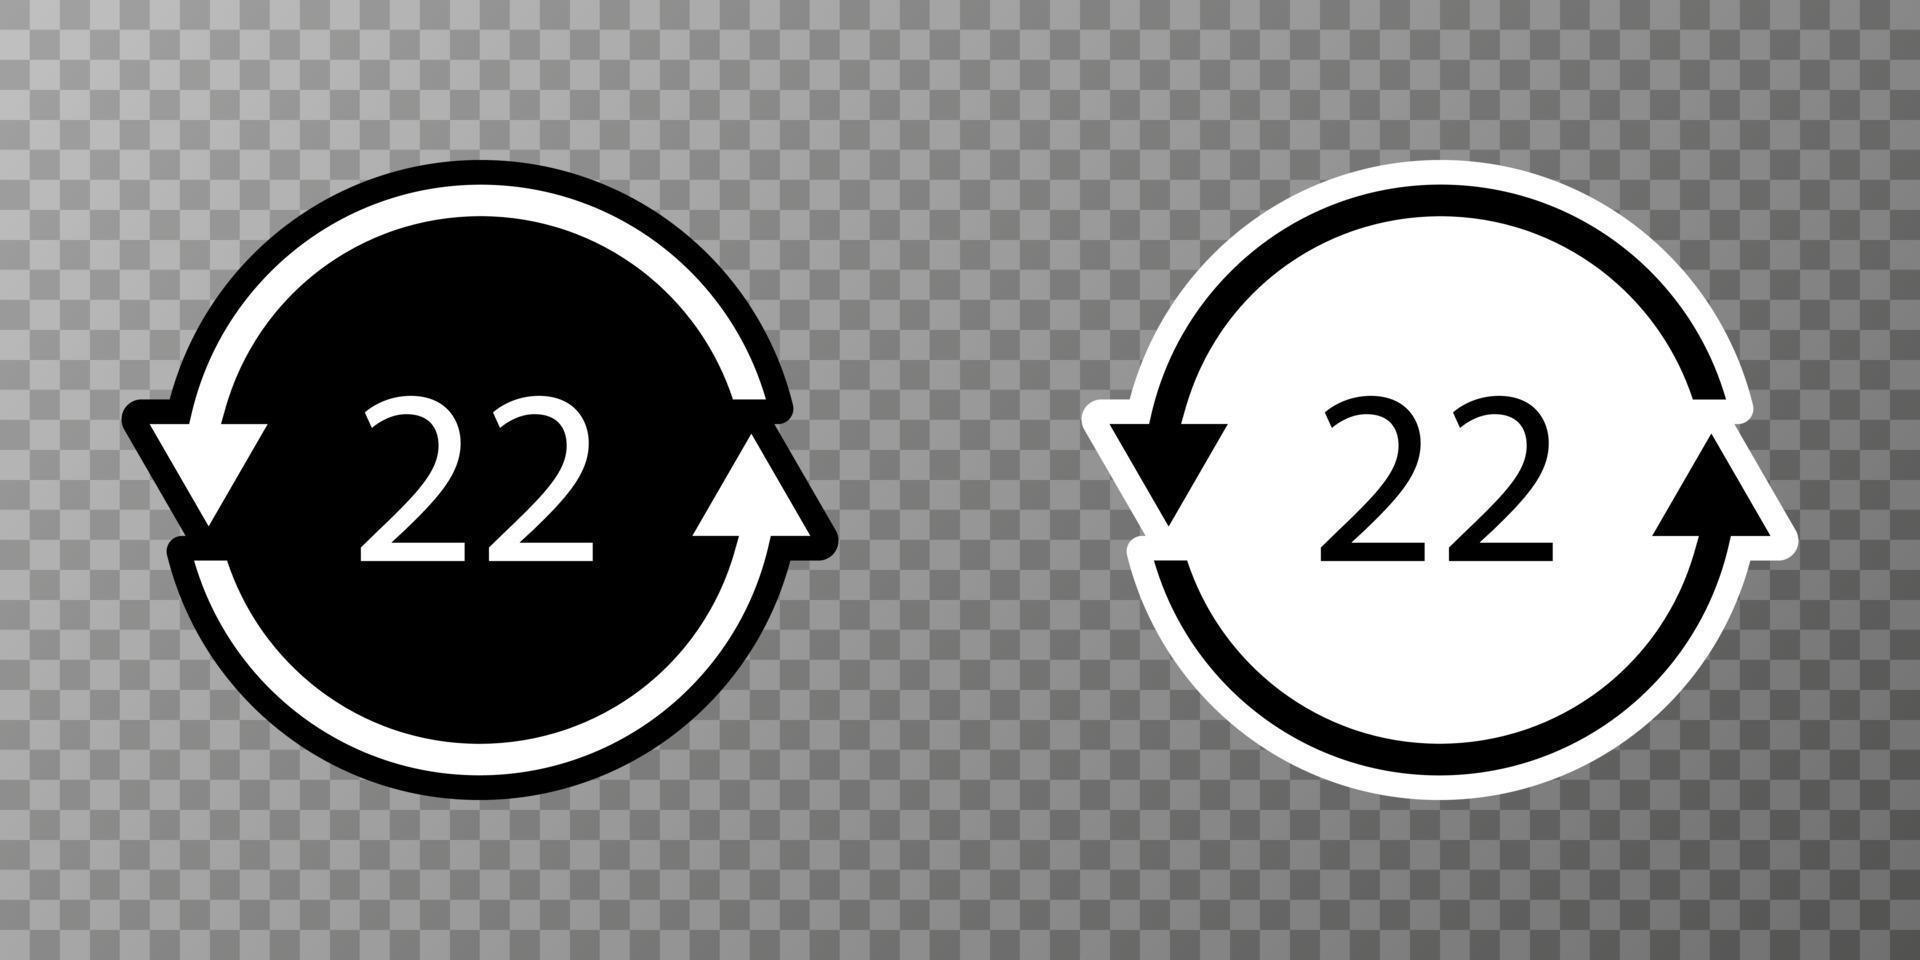 Paper recycling symbol PAP 22. Vector illustration.